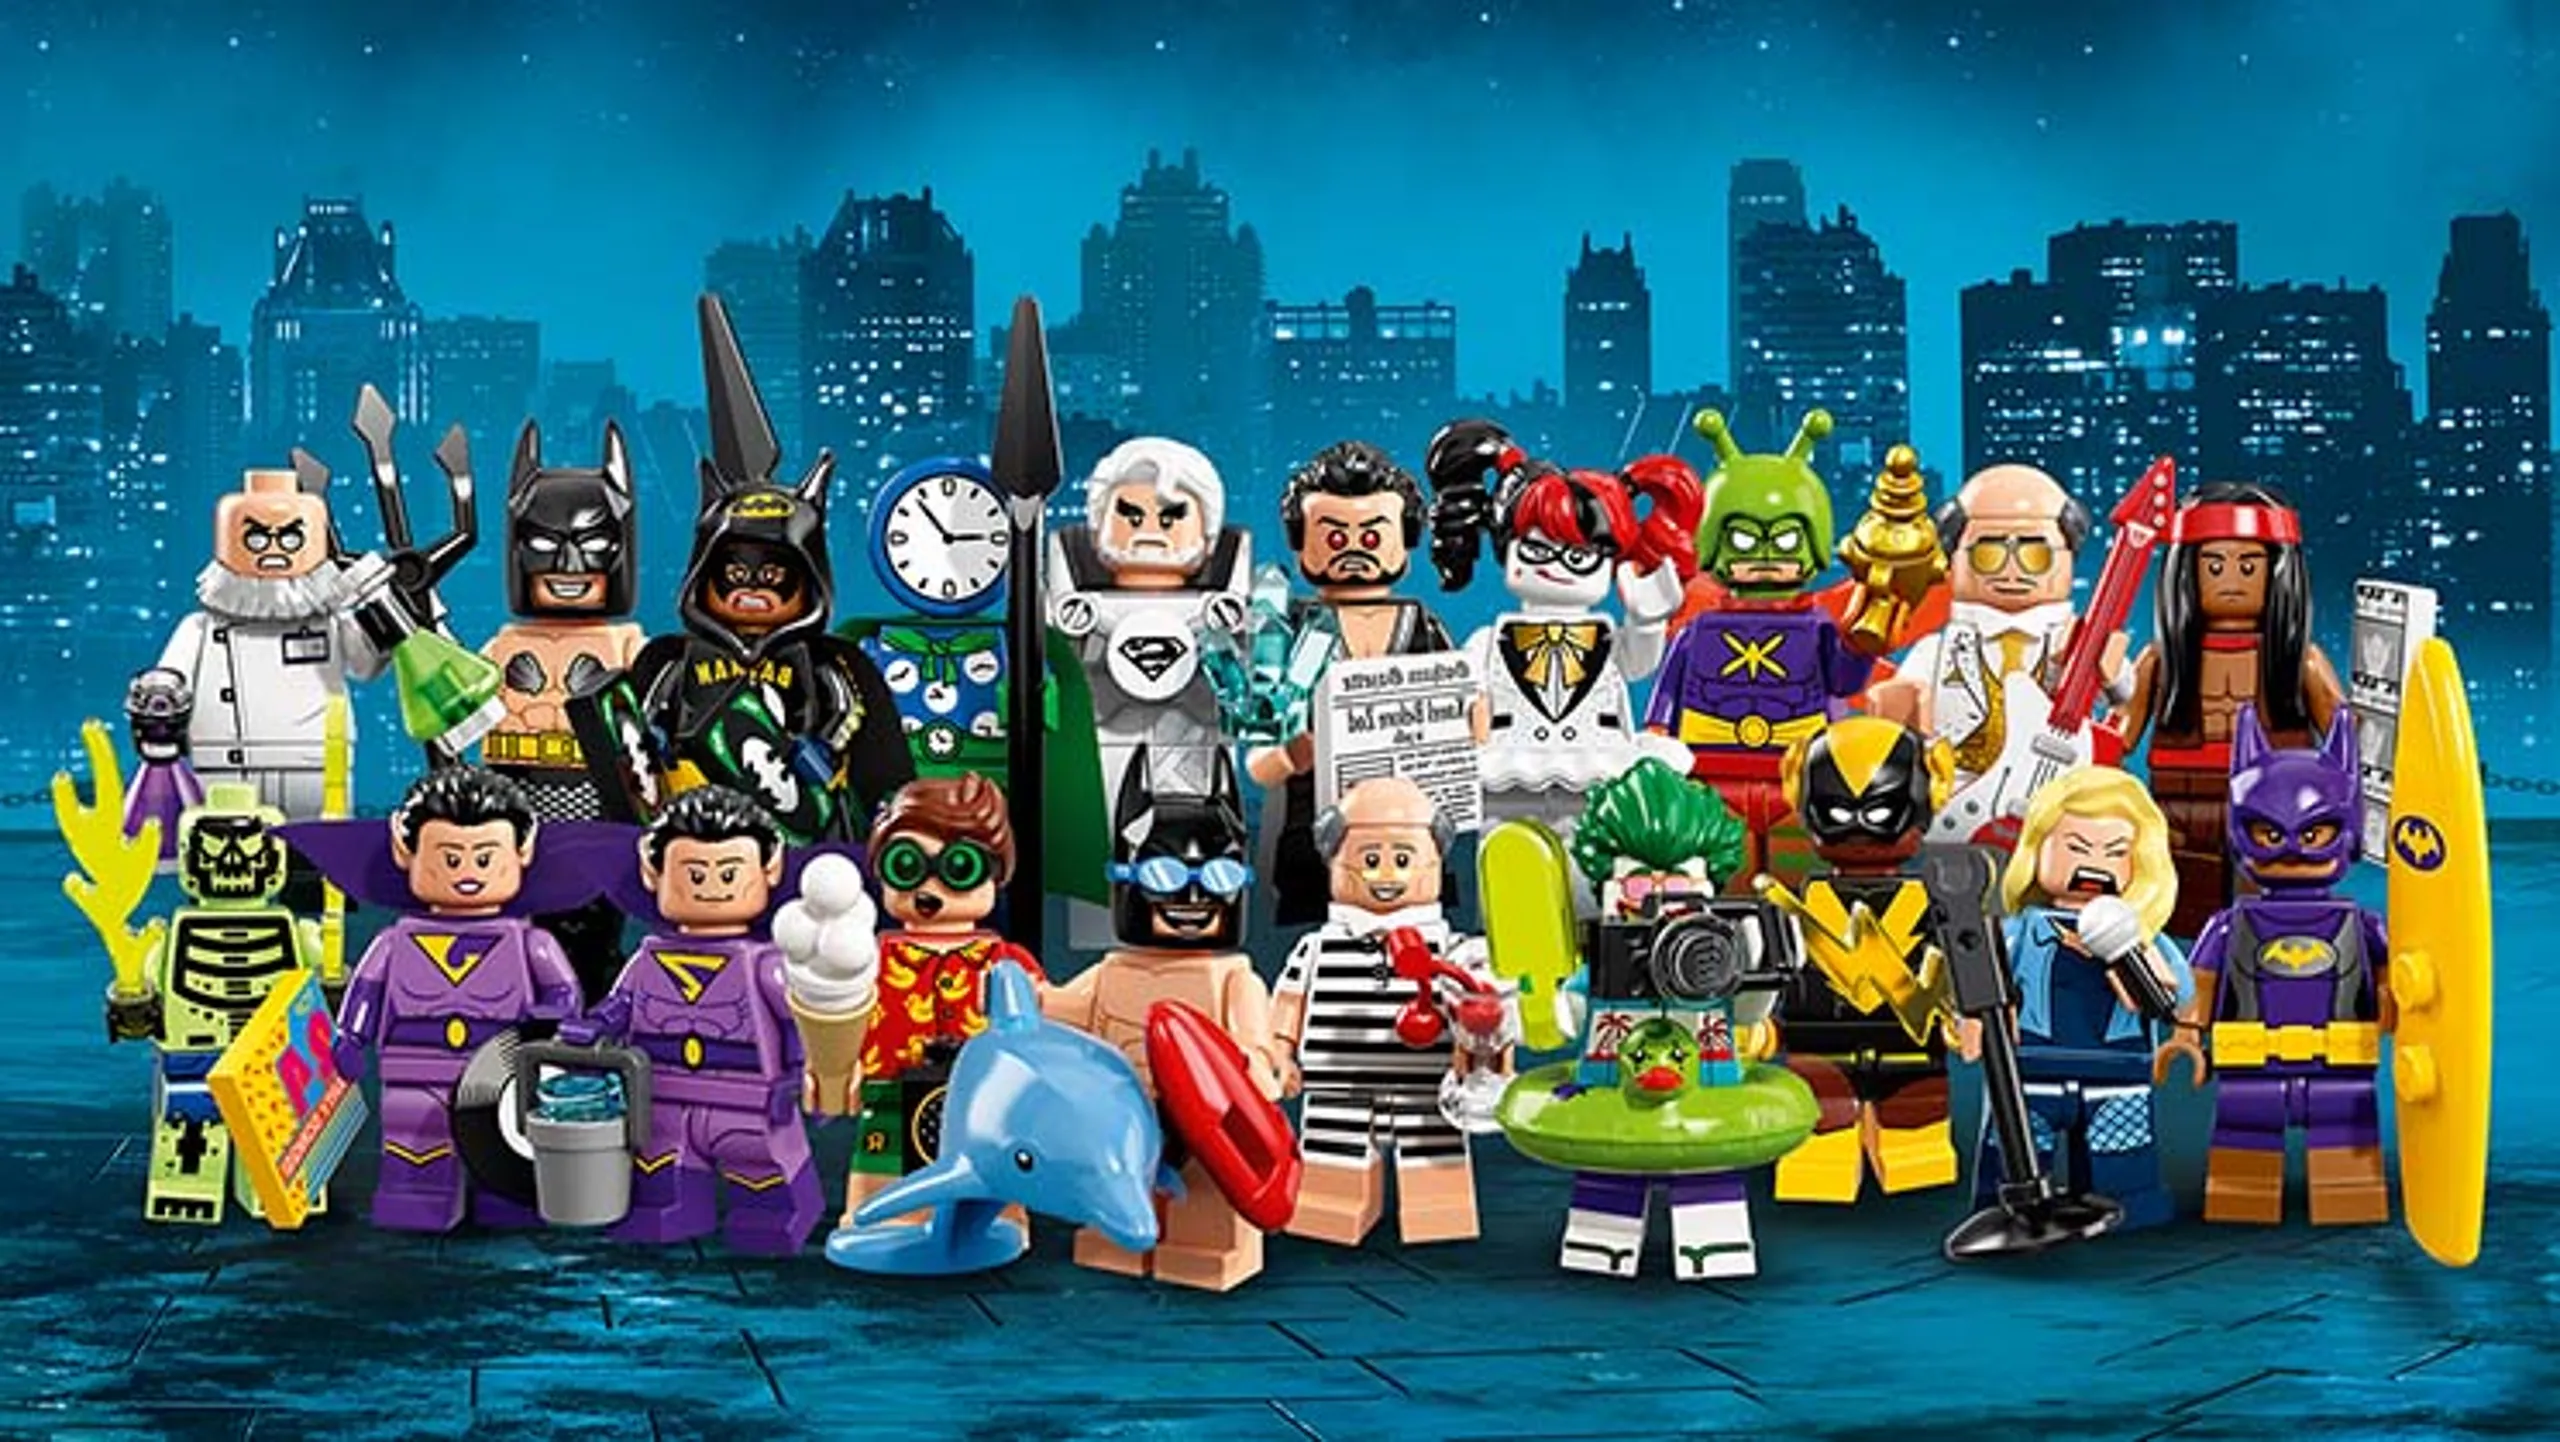 LEGO Minifigures - 71020 THE LEGO® BATMAN MOVIE Series 2 - You can collect the characters from The LEGO Batman Movie with LEGO Minifigures: Who's your favorite?